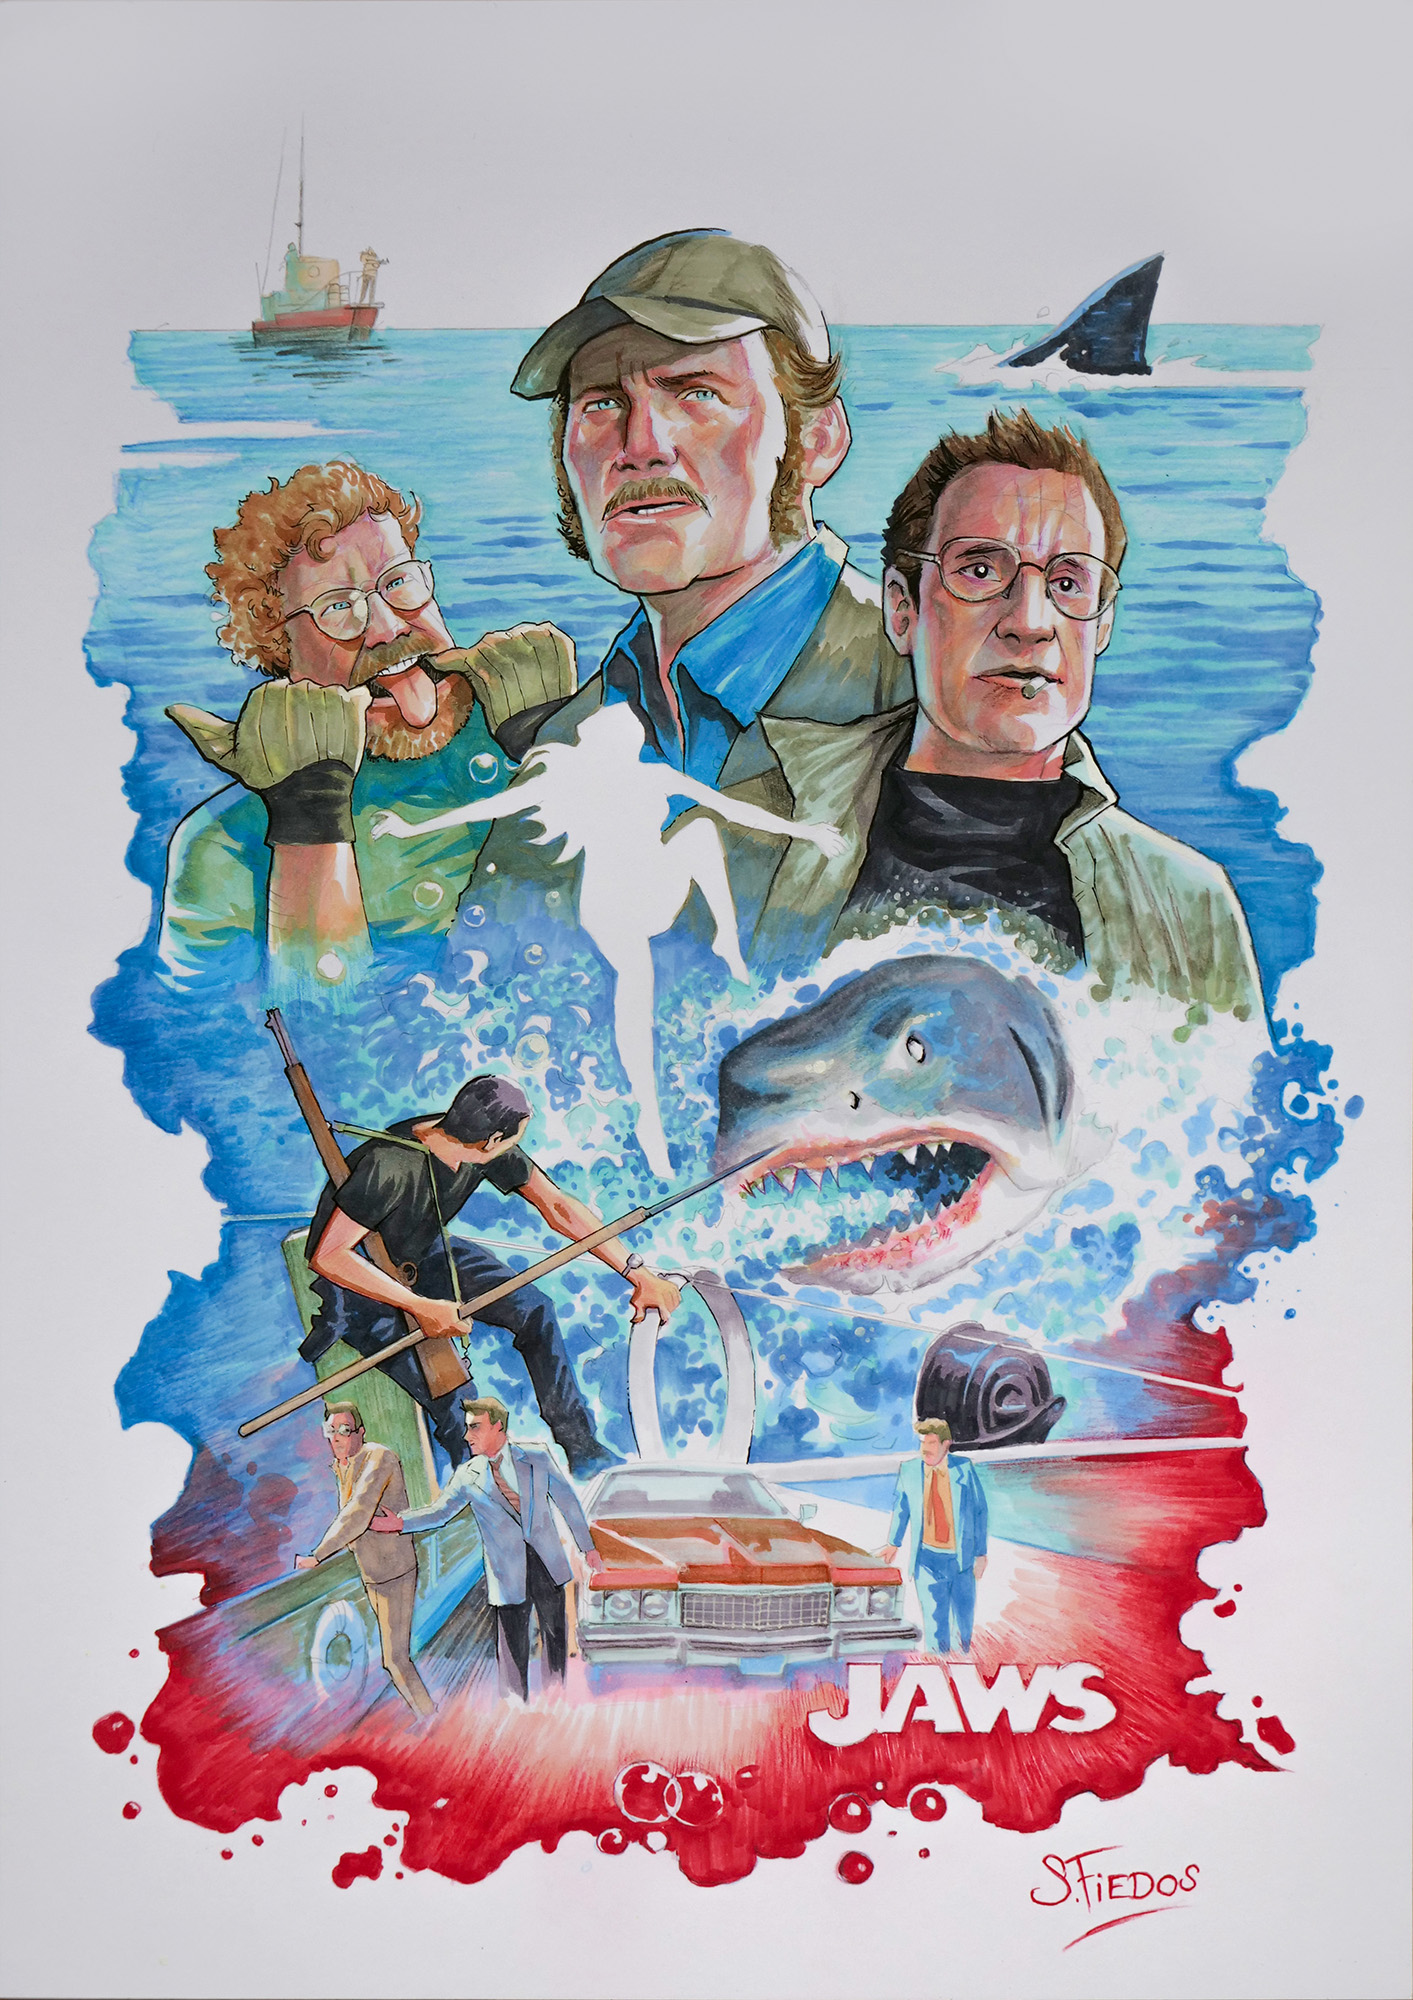 Jaws tribute by Serge Fiedos